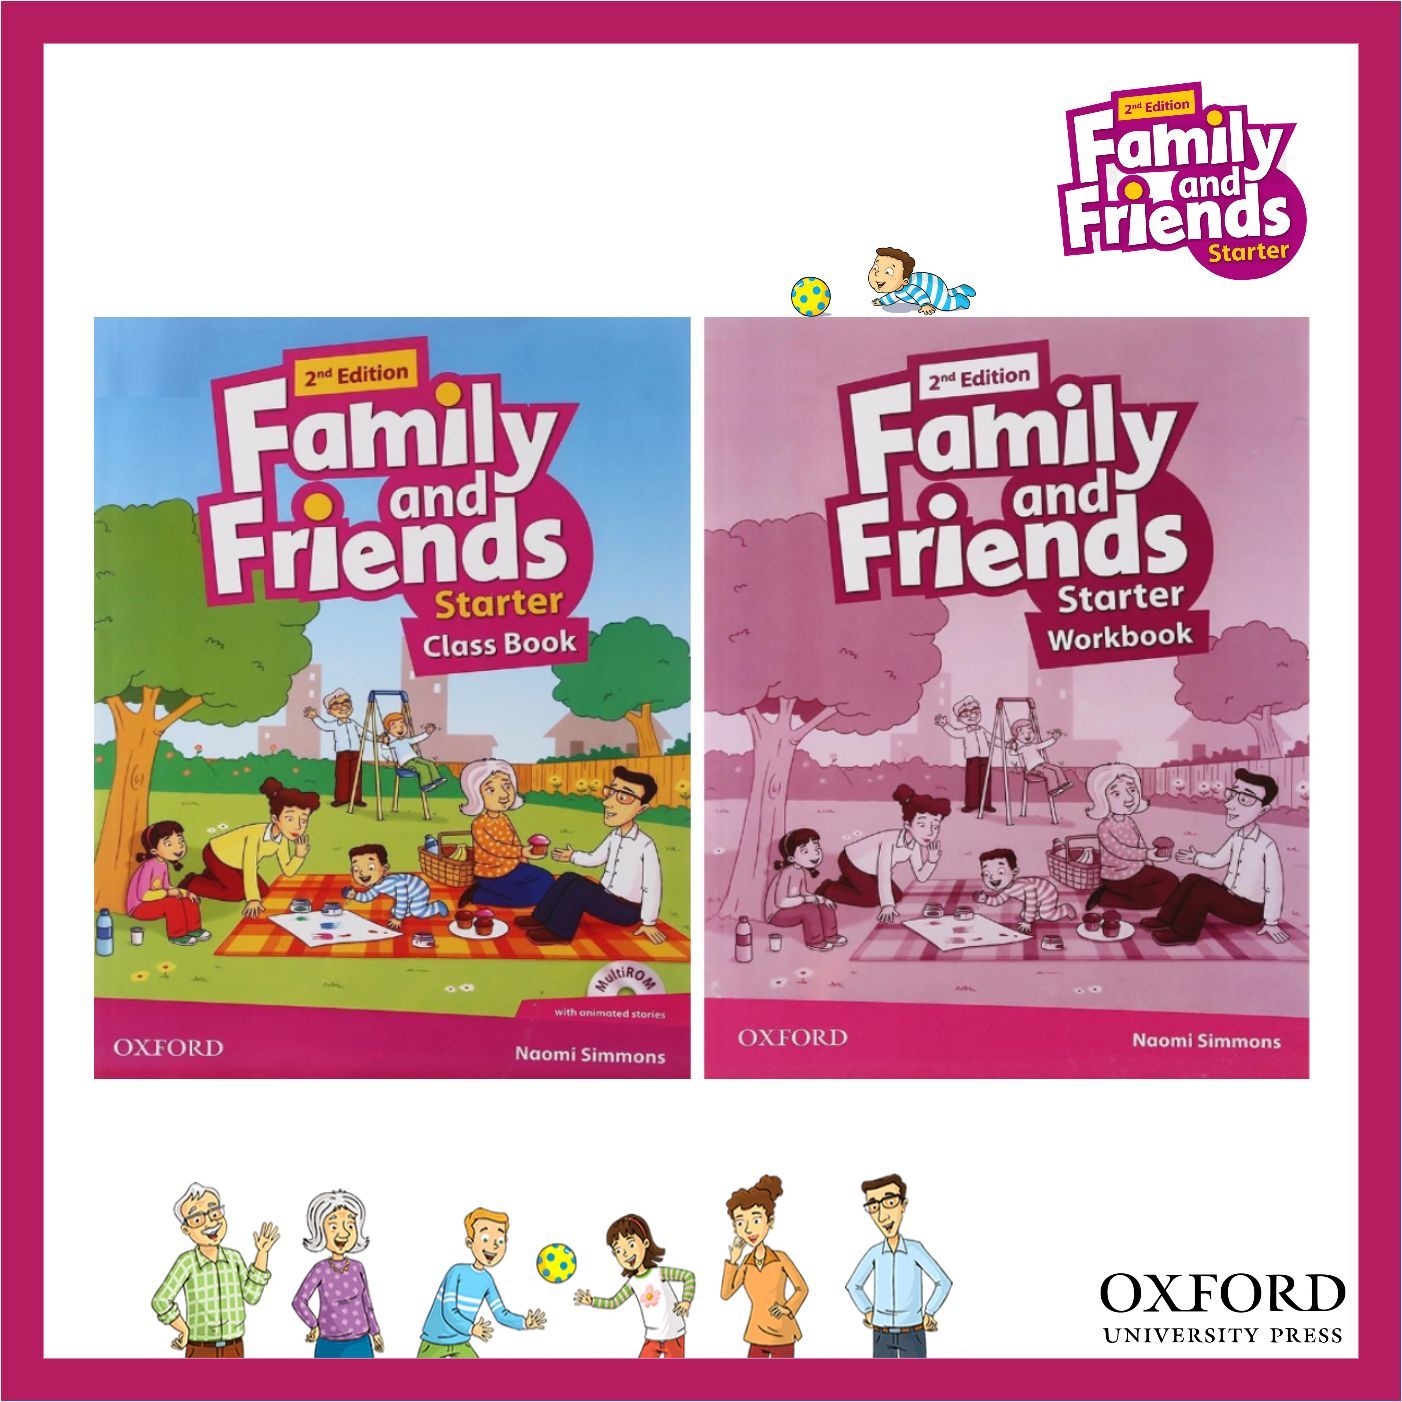 Family and friends starter book. 2nd Edition Family friends Workbook Oxford Naomi Simmons. Family and friends: Starter. Family and friends Starter class book. Family and friends Starter Workbook.